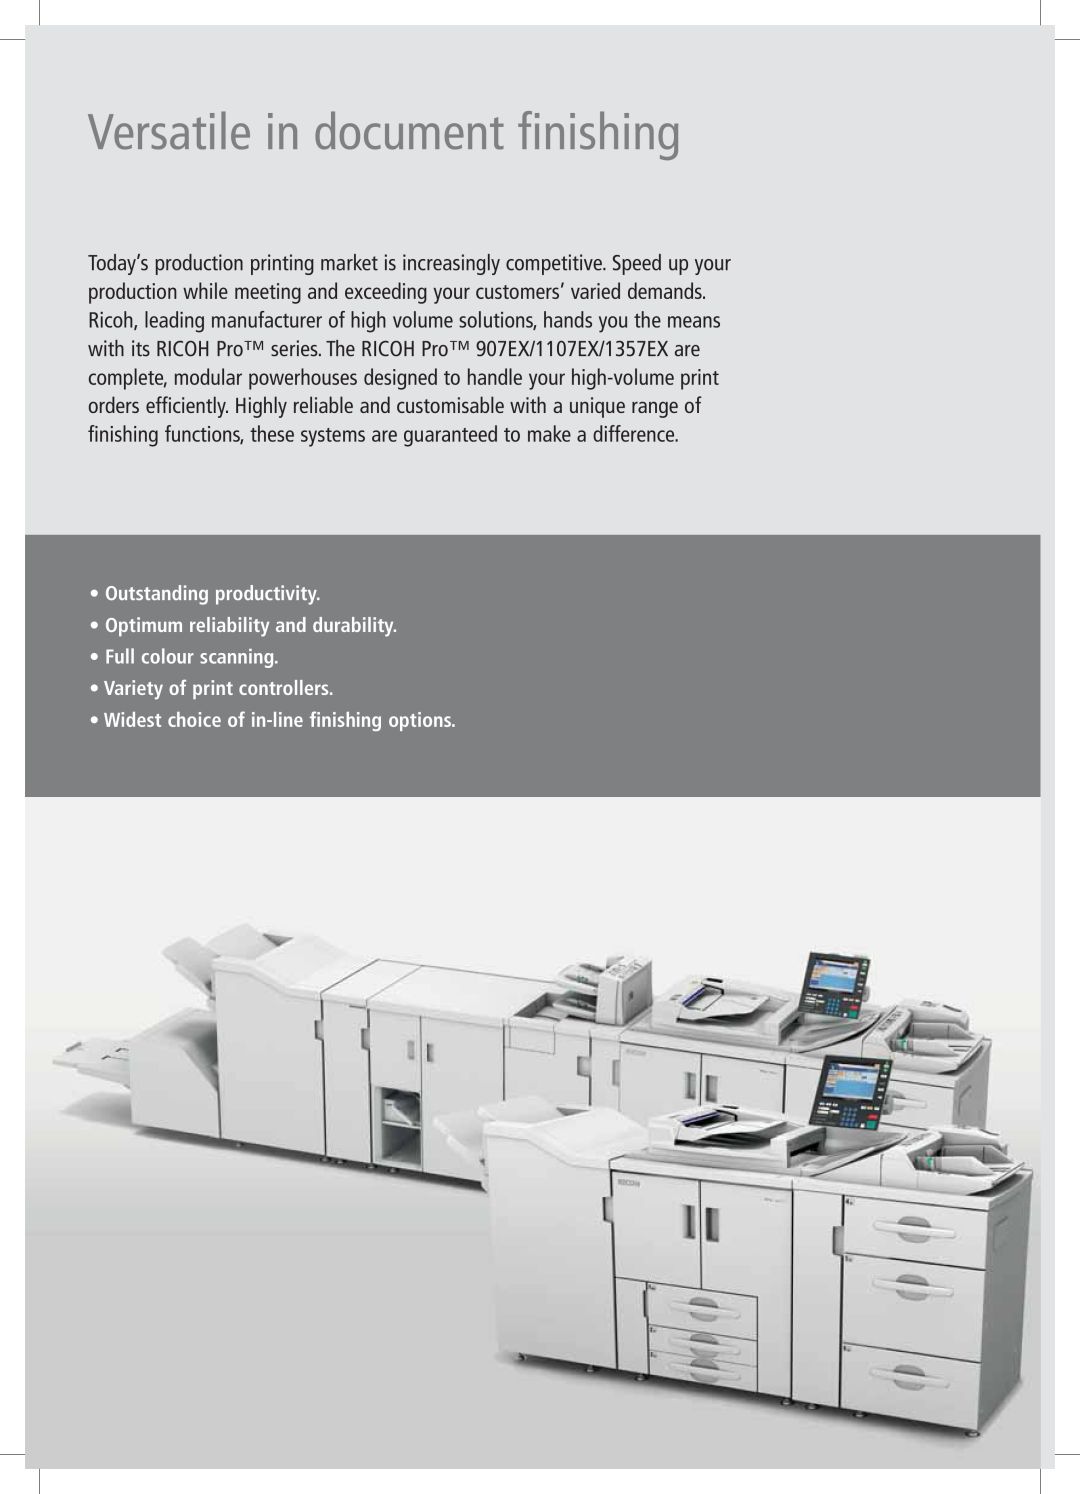 Ricoh 1357EX, 907EX, 1107EX Versatile in document finishing, Outstanding productivity Optimum reliability and durability 